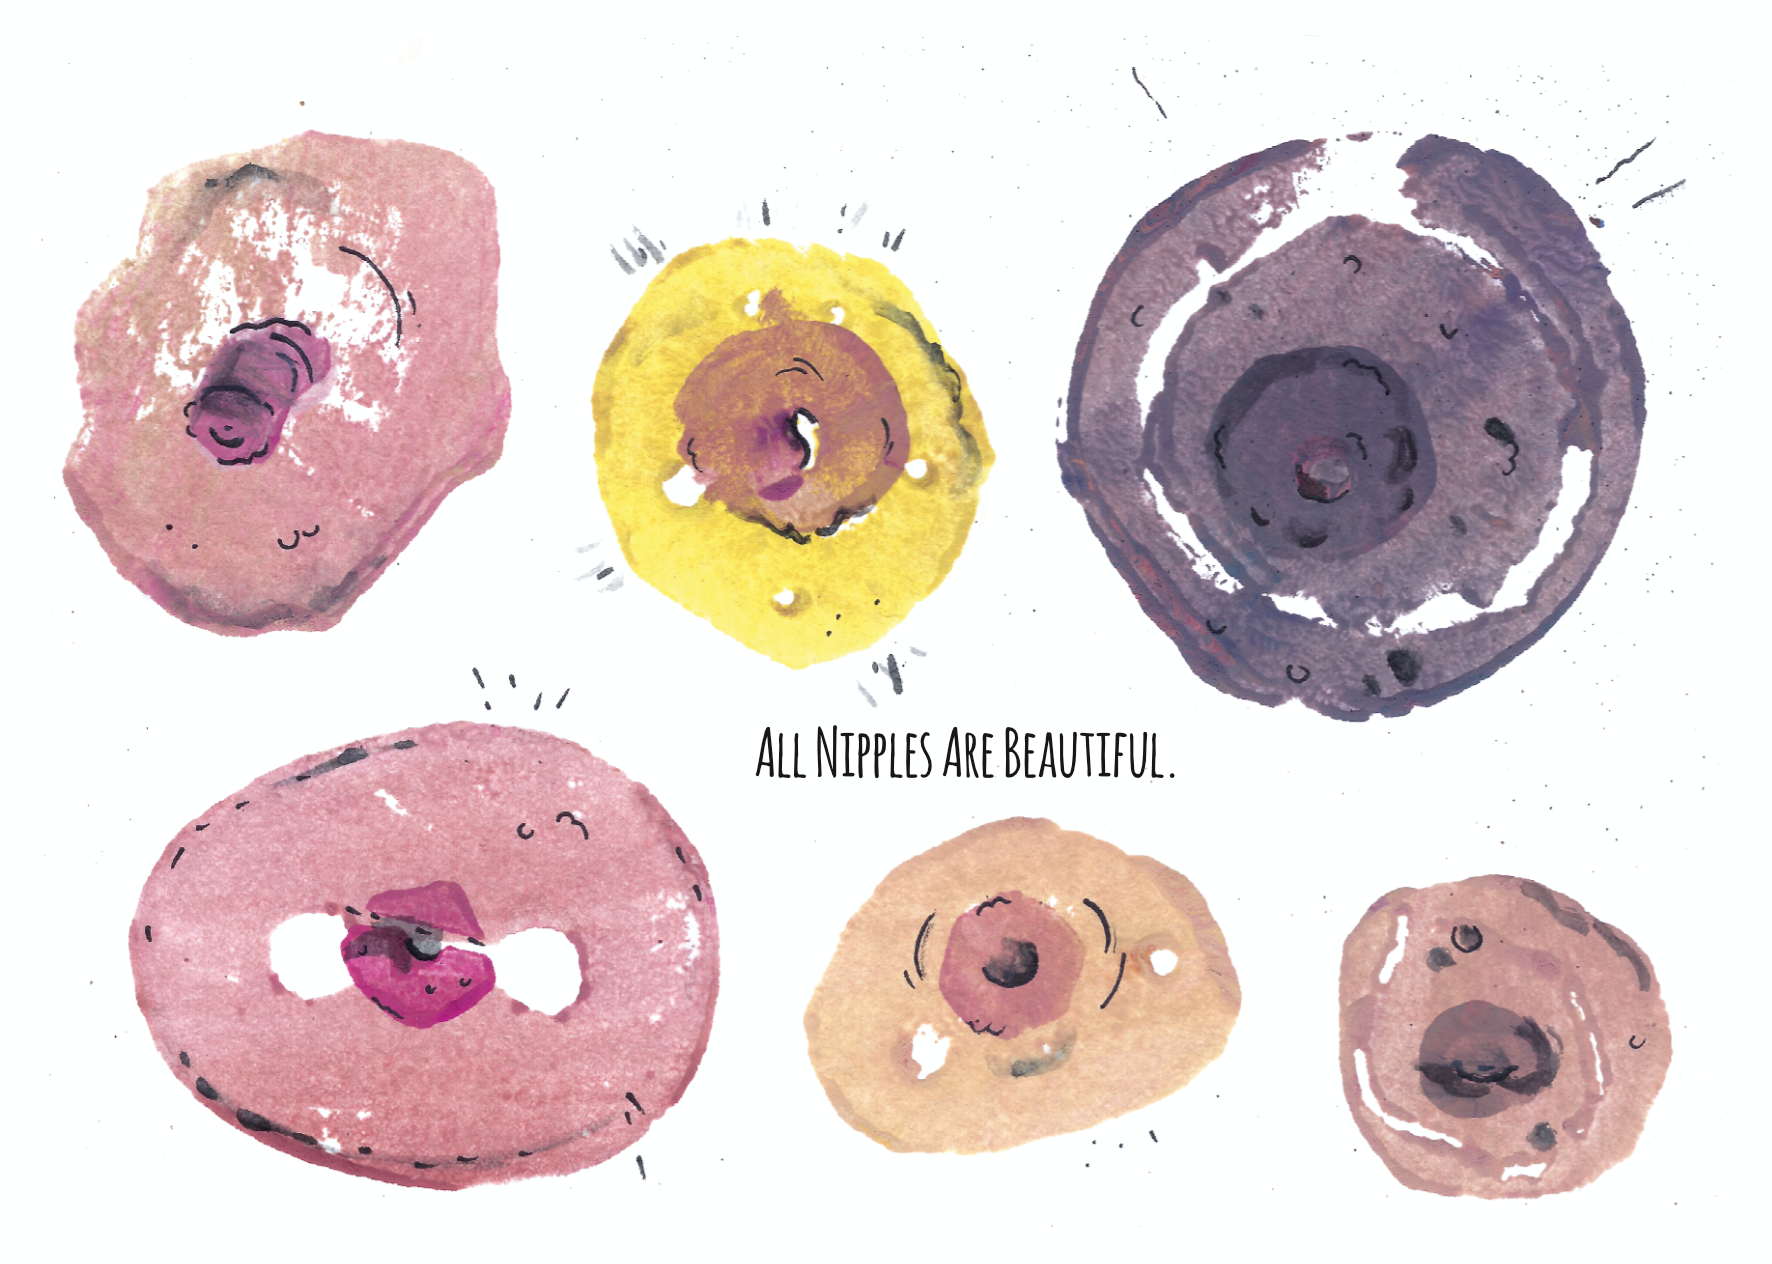 All nipples are beautiful